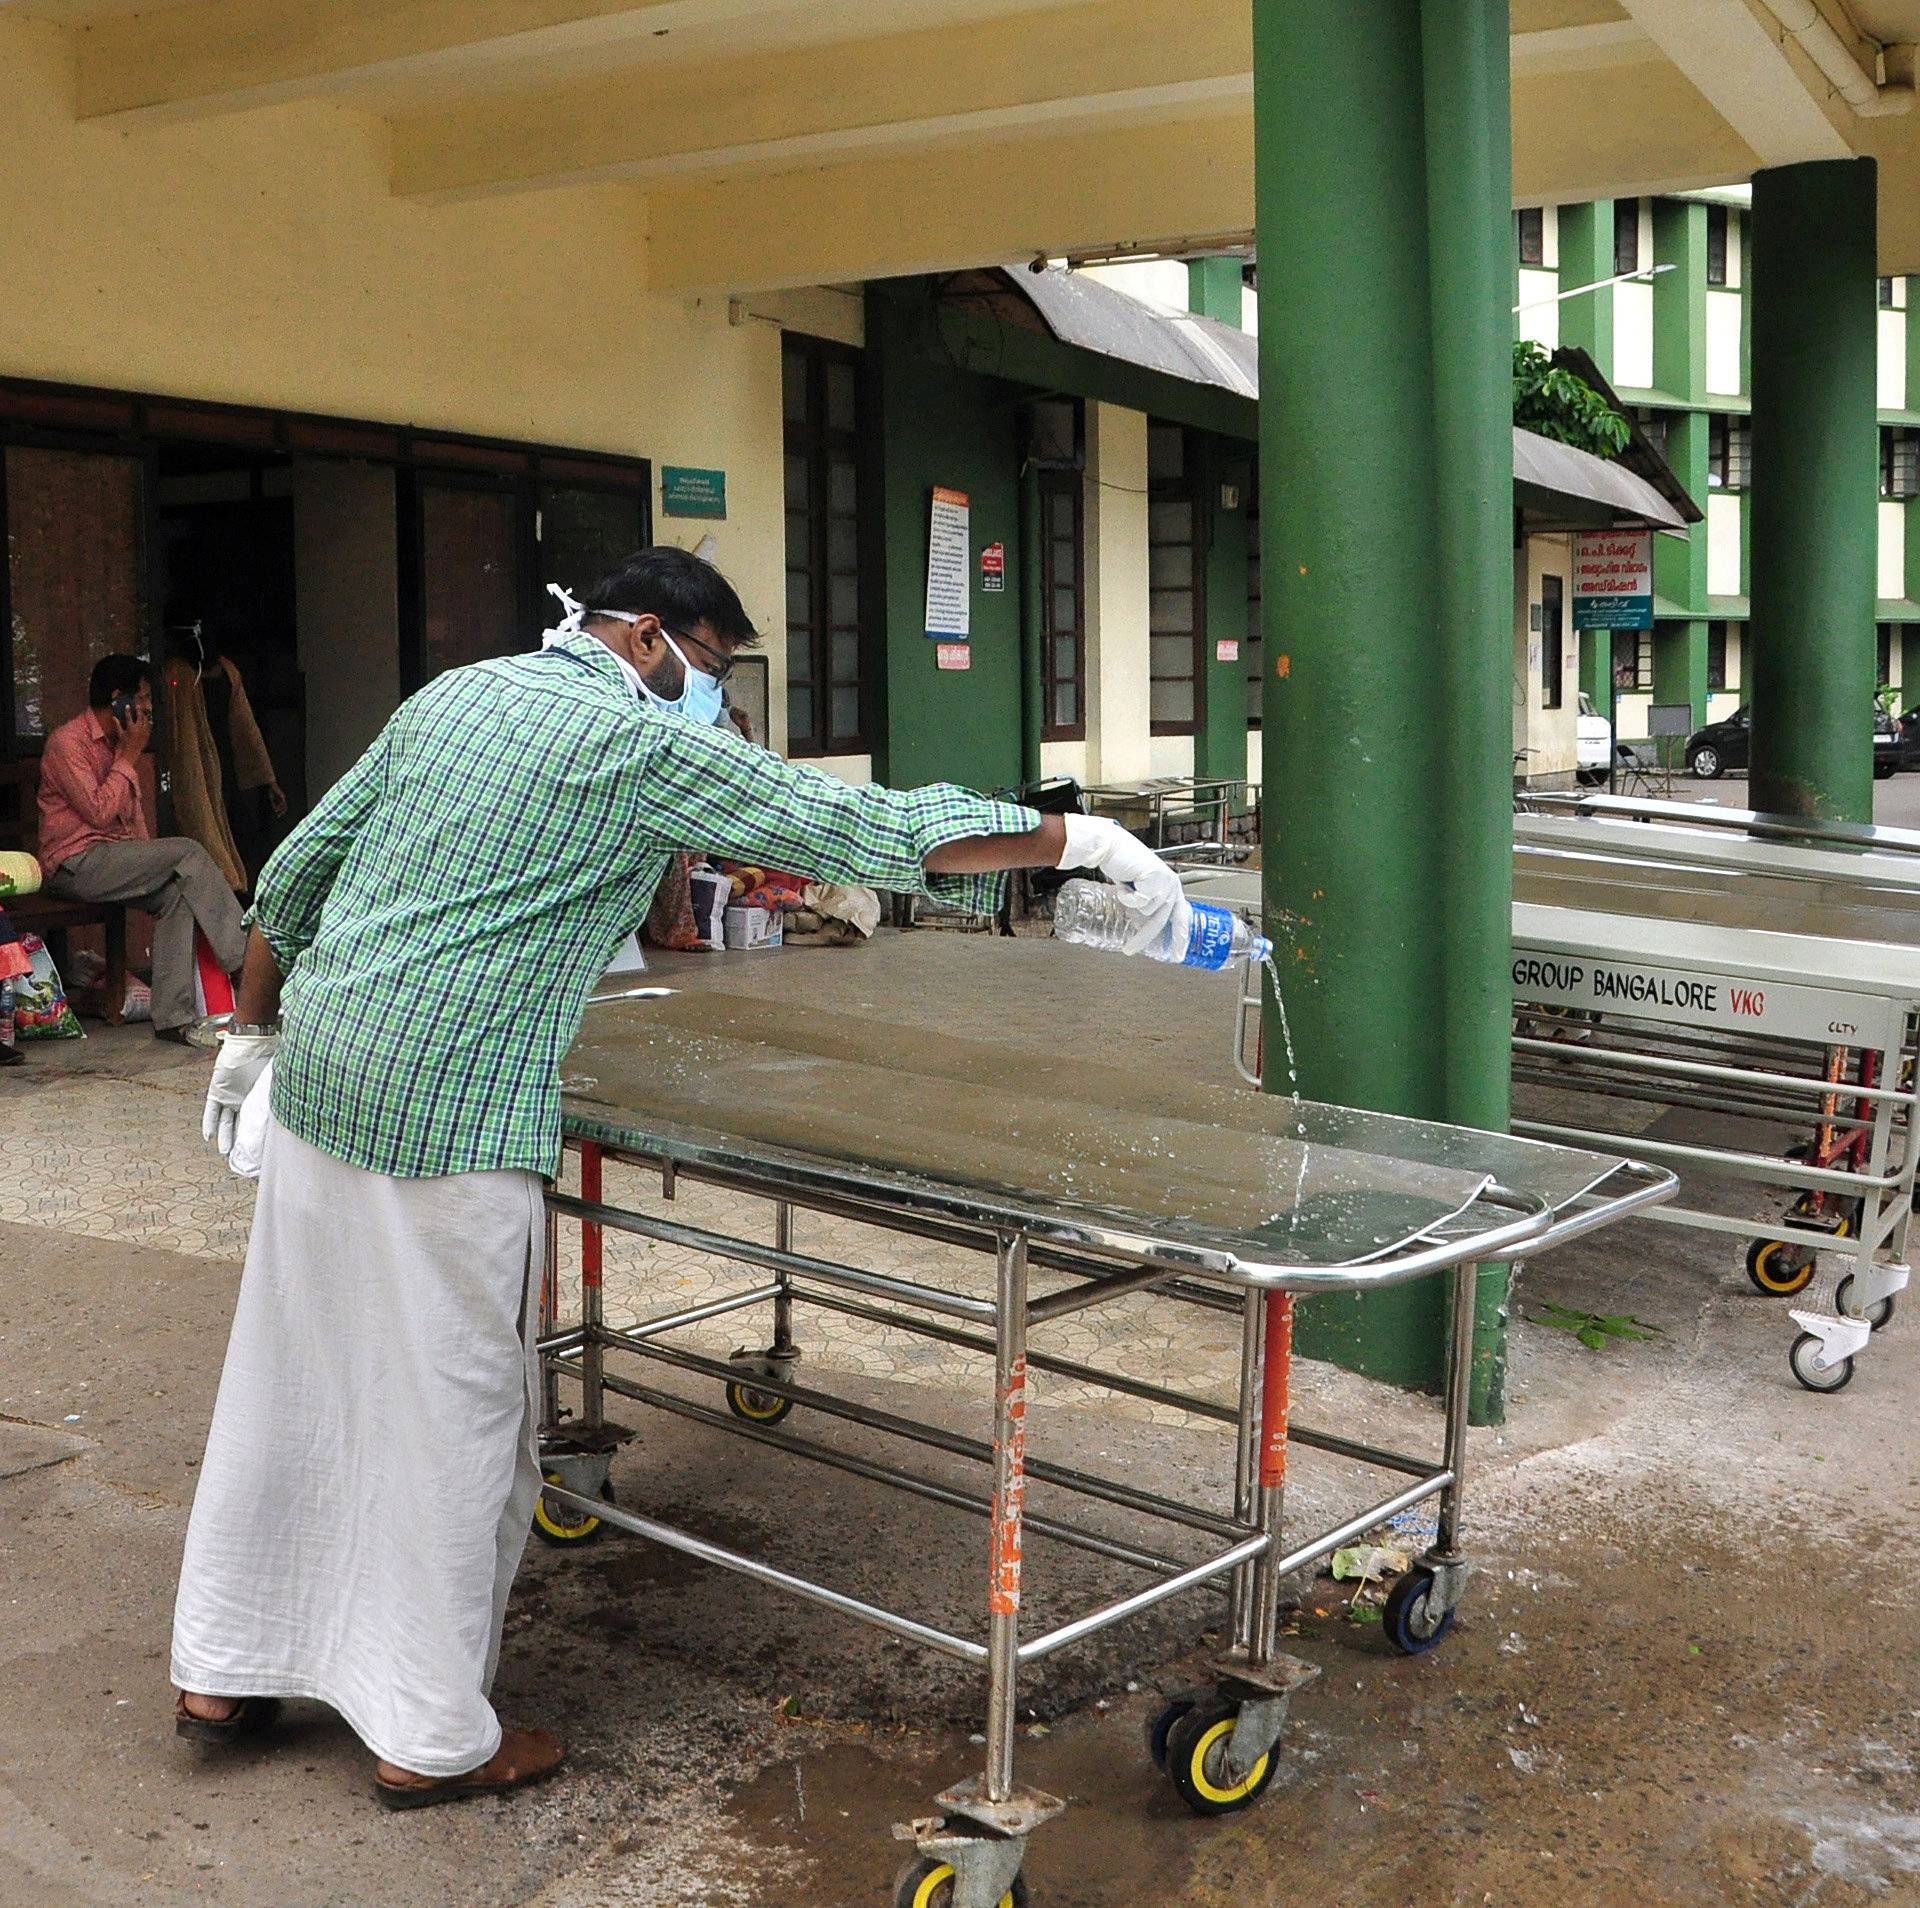 A member of an NGO cleans a cot outside the casualty ward at a hospital in Kozhikode